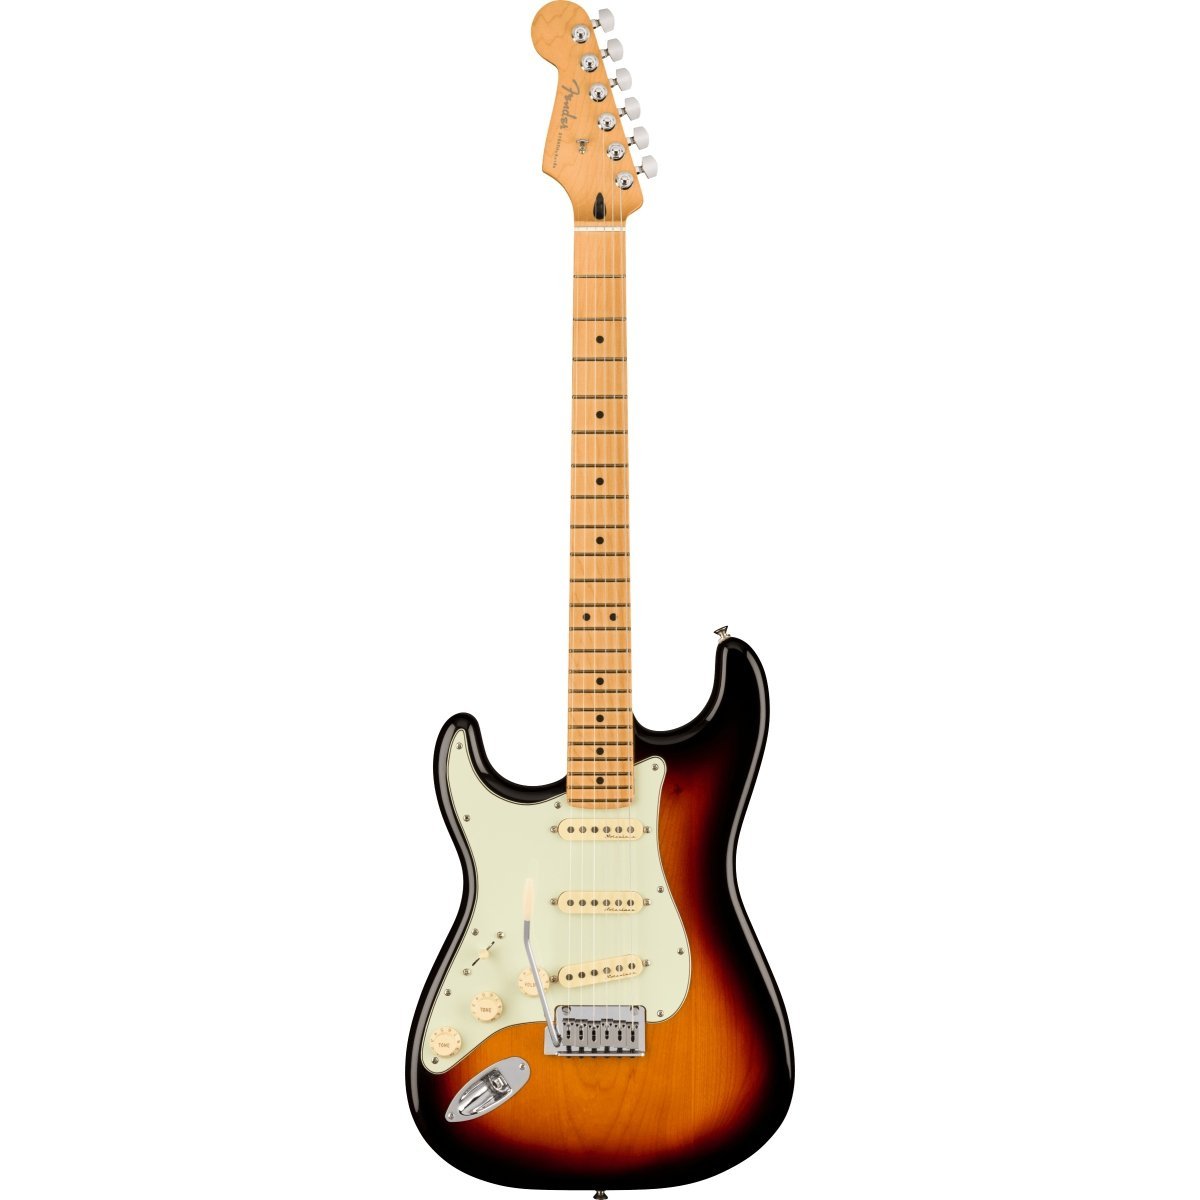 Left-Hand　3-Color　Maple　Fingerboard　Plus　Stratocaster　Fender/Player　エレクトリックギター　Su-